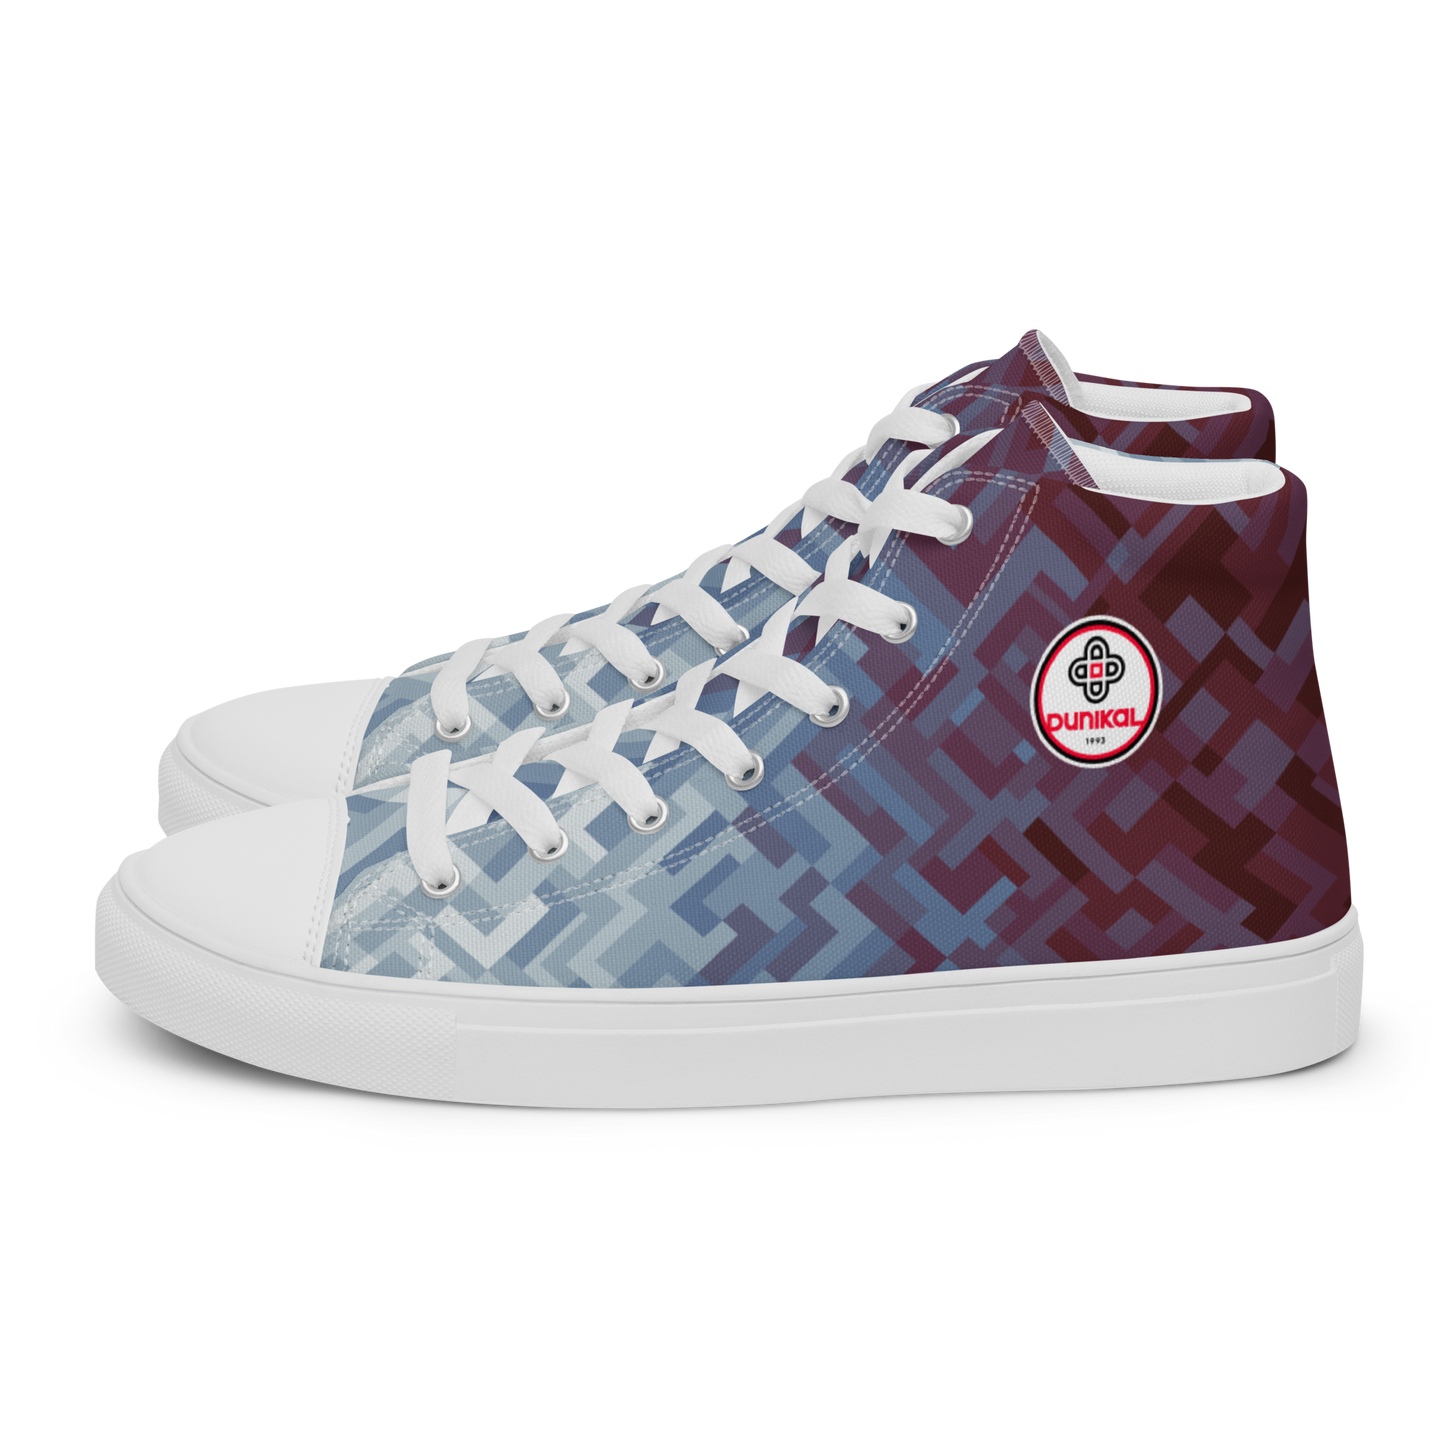 Men's Canvas Sneakers ❯ Polygon Gradient ❯ Chasse-Galerie